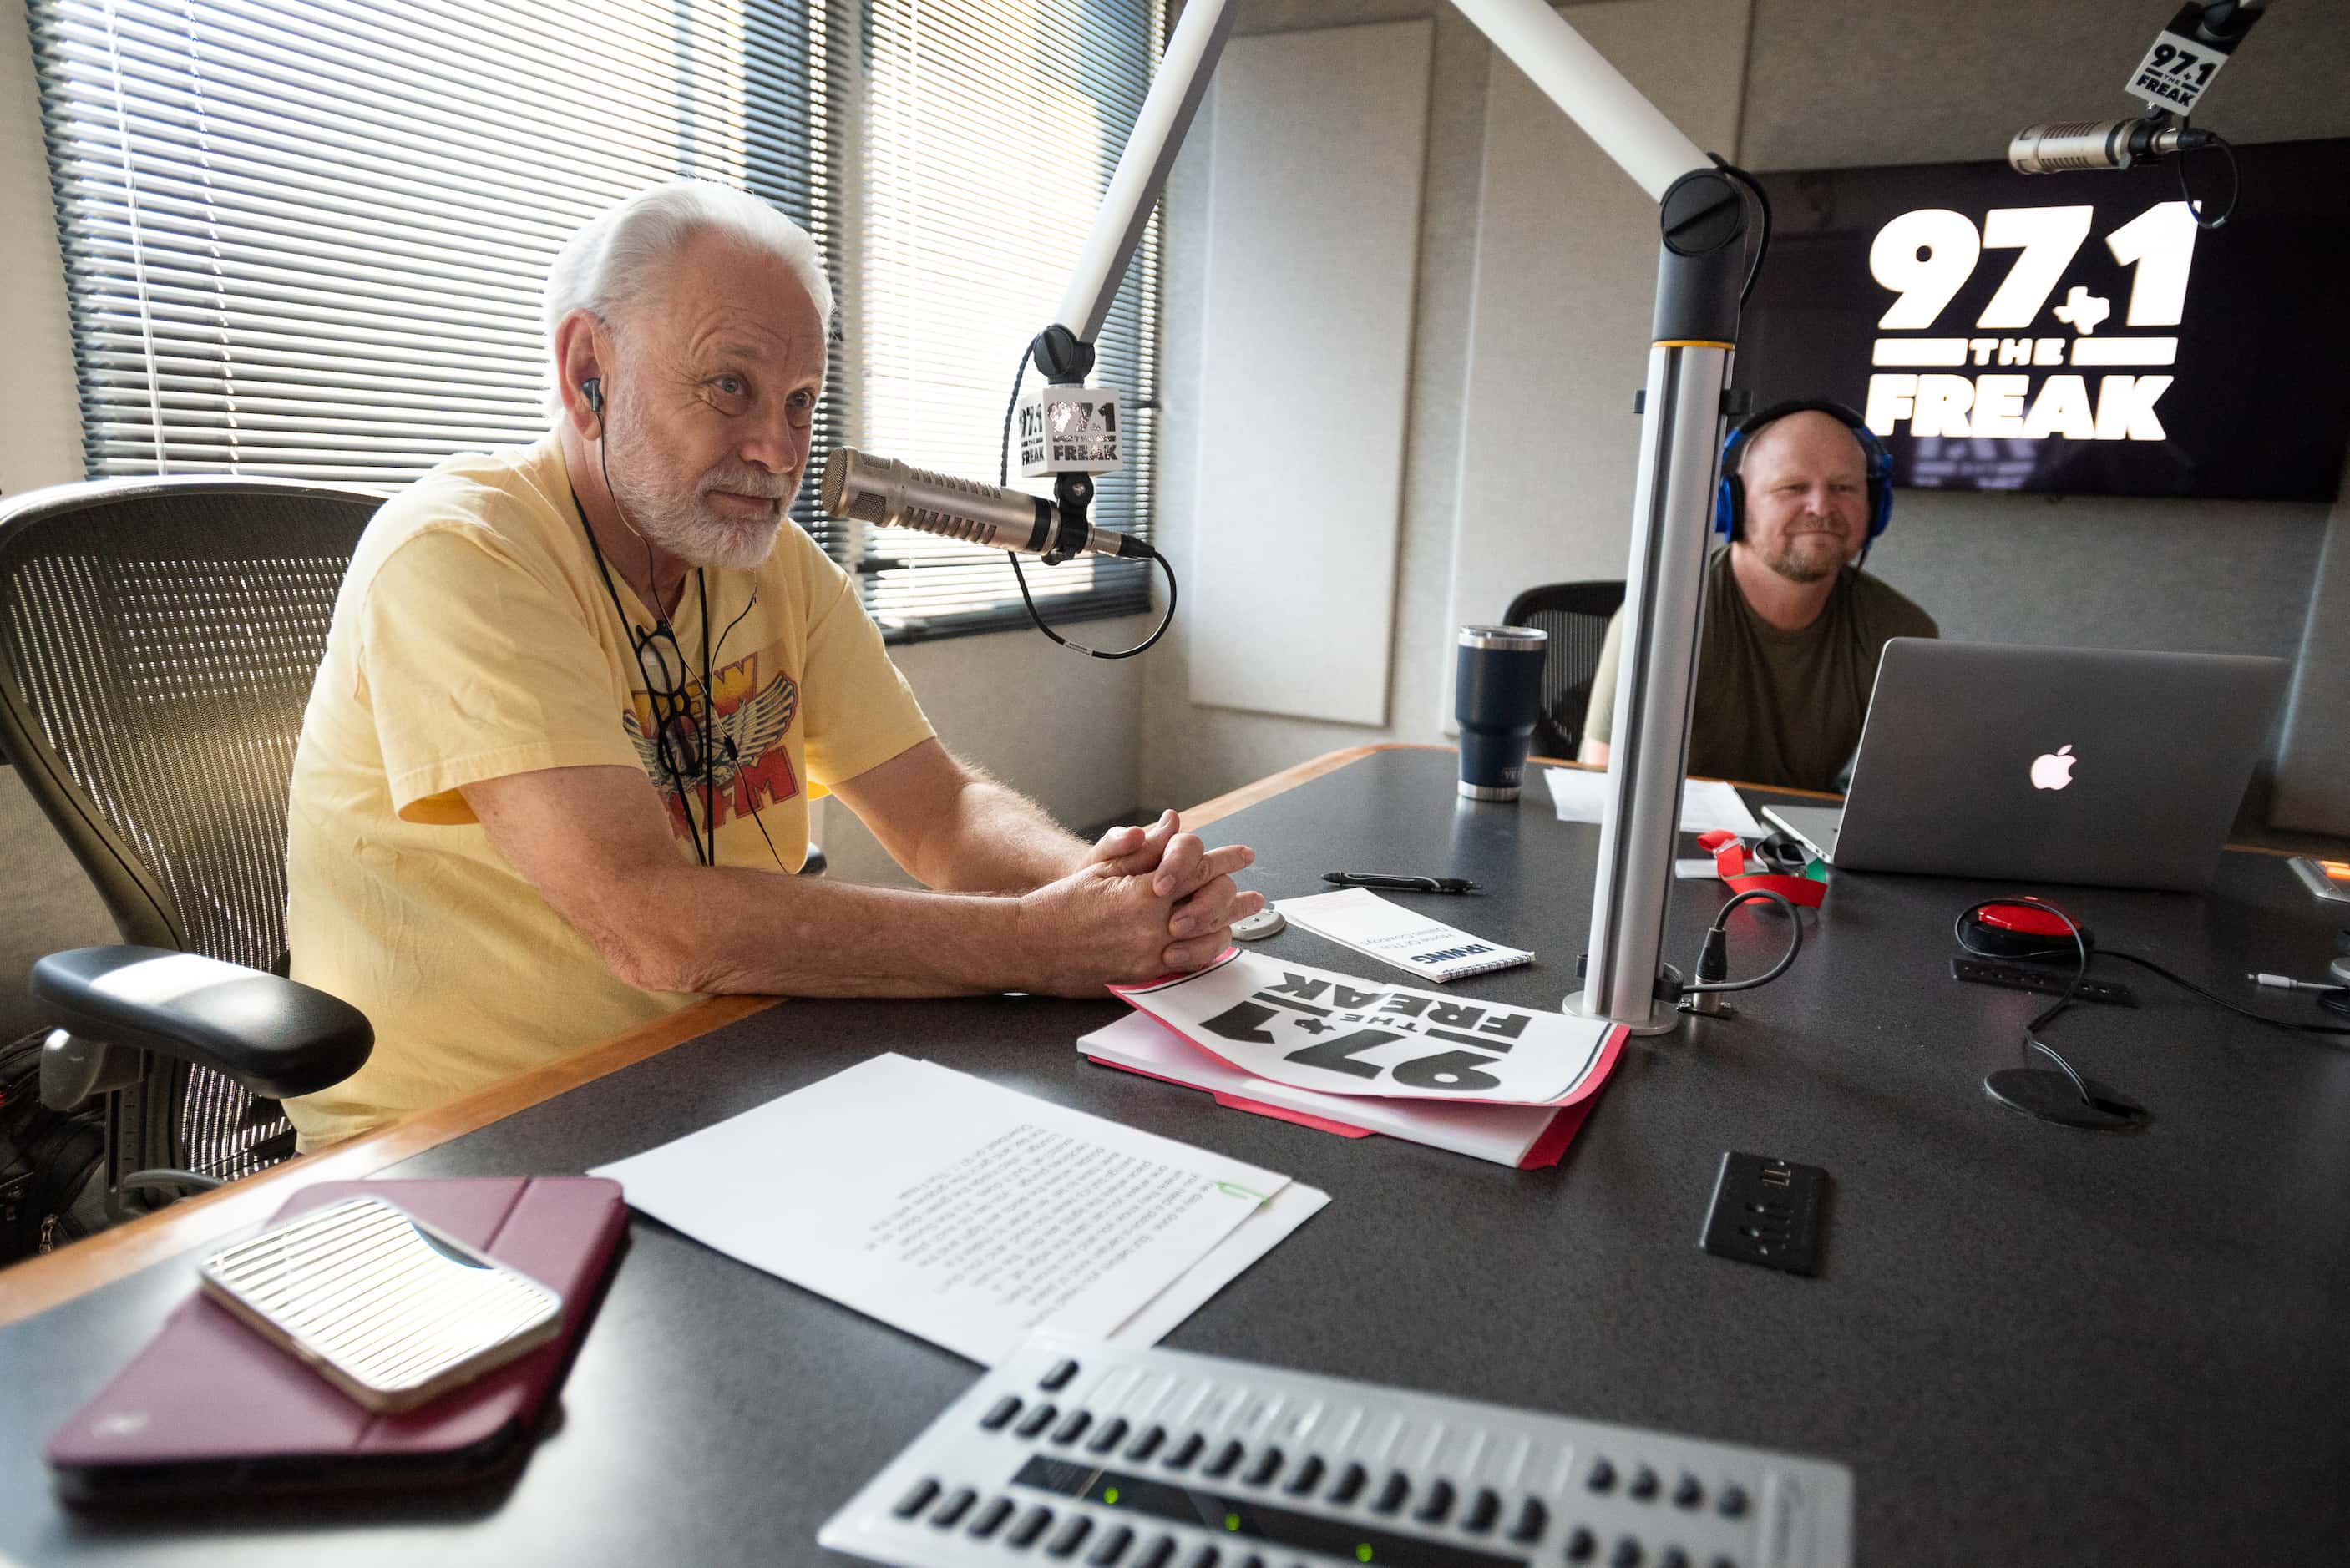 Mike Rhyner, left, and co-host Mike Sirois listen to the intro before they go live on the air.